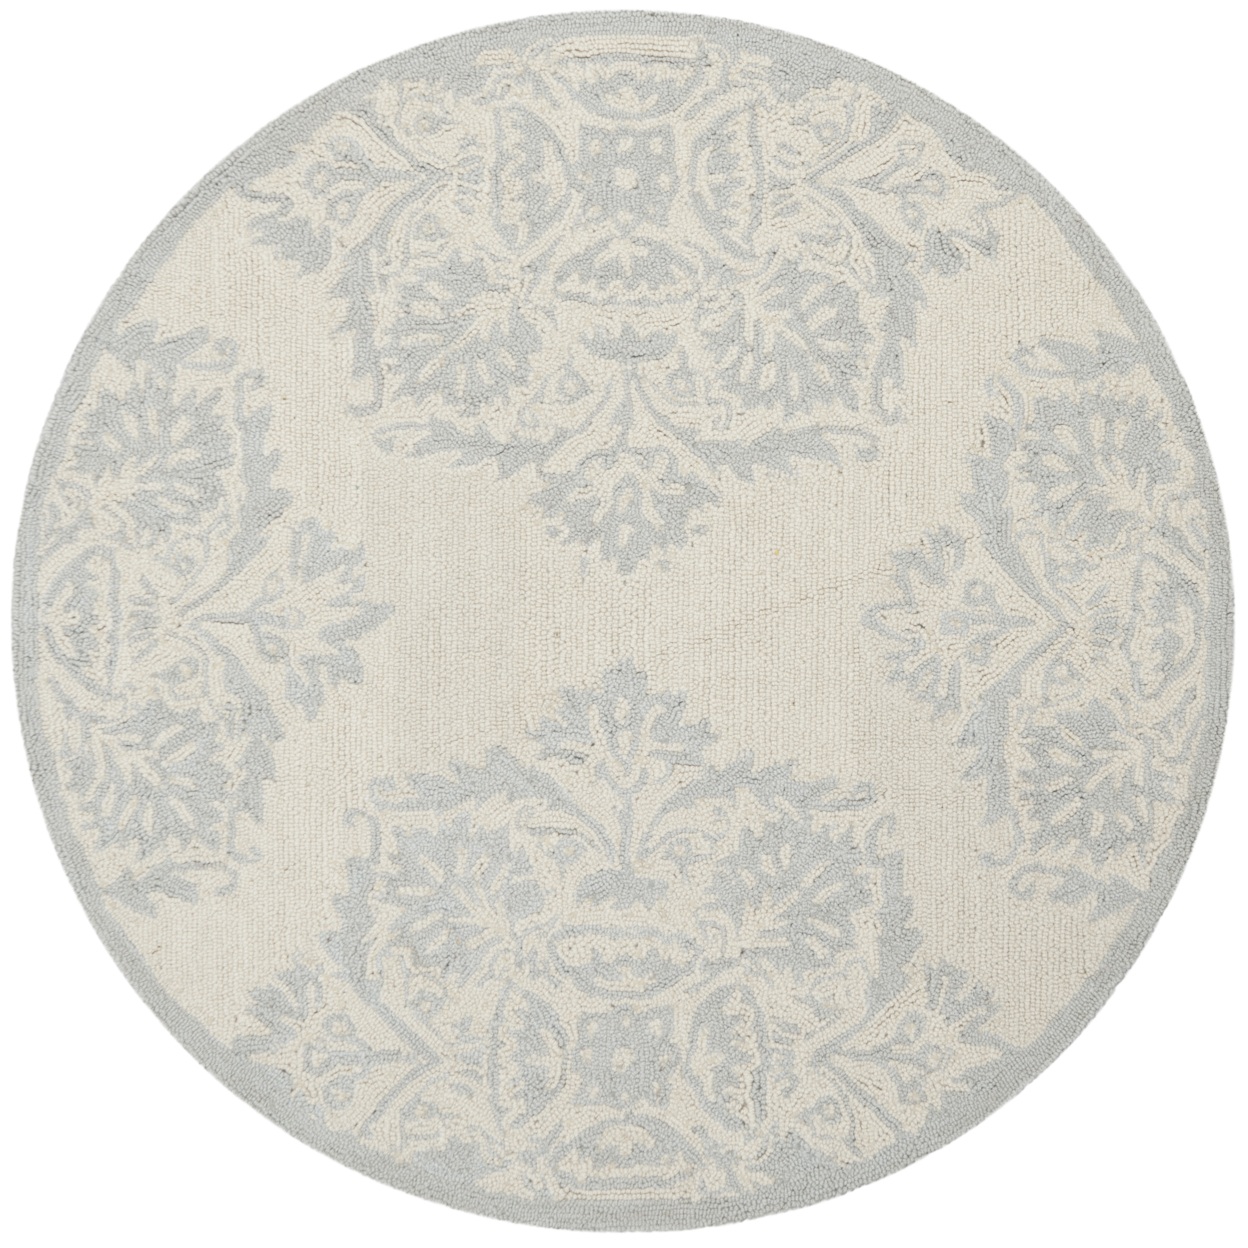 SAFAVIEH Chelsea HK359A Hand-hooked Ivory / Blue Rug - 4' Round